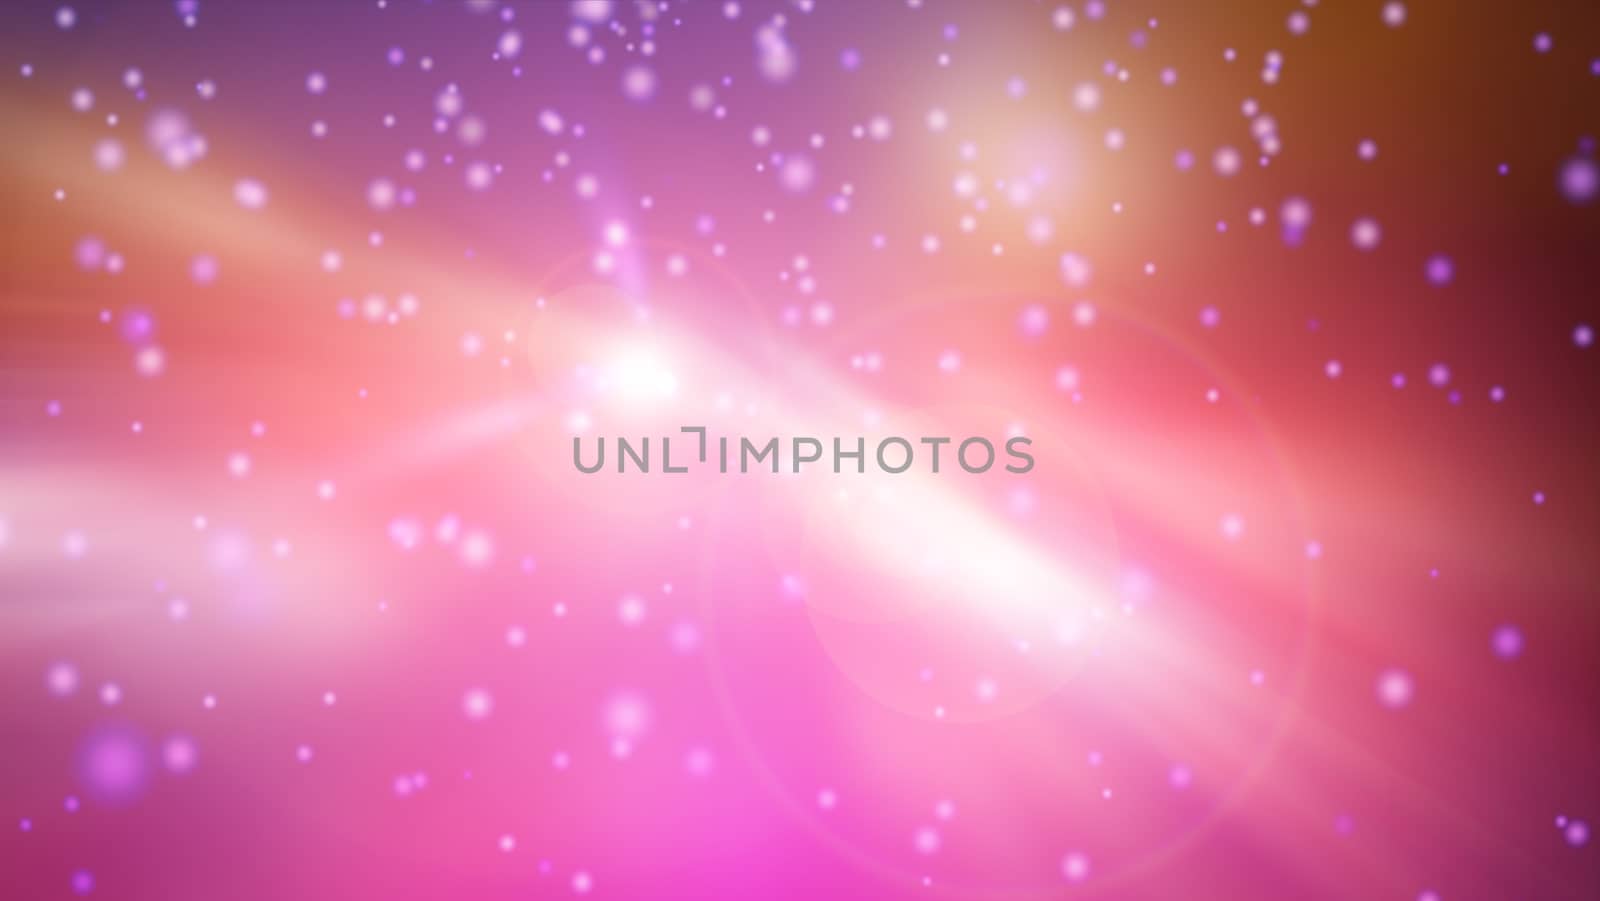 Light rays move through many shiny dots, bright background, 3d render computer generated illustration